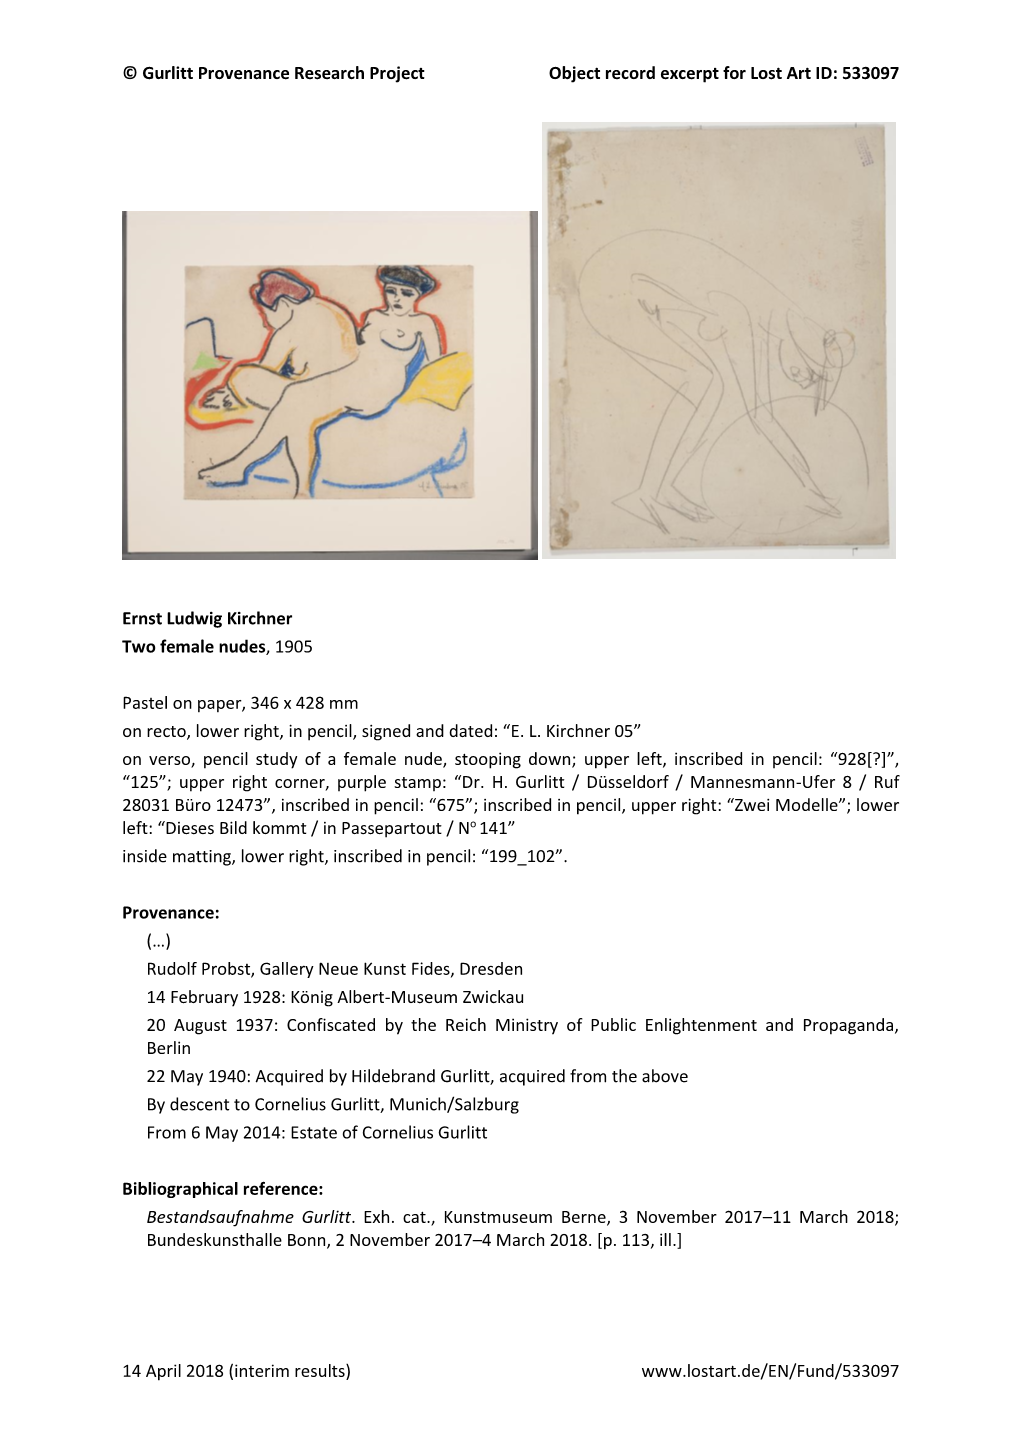 © Gurlitt Provenance Research Project Object Record Excerpt for Lost Art ID: 533097 14 April 2018 (Interim Results)